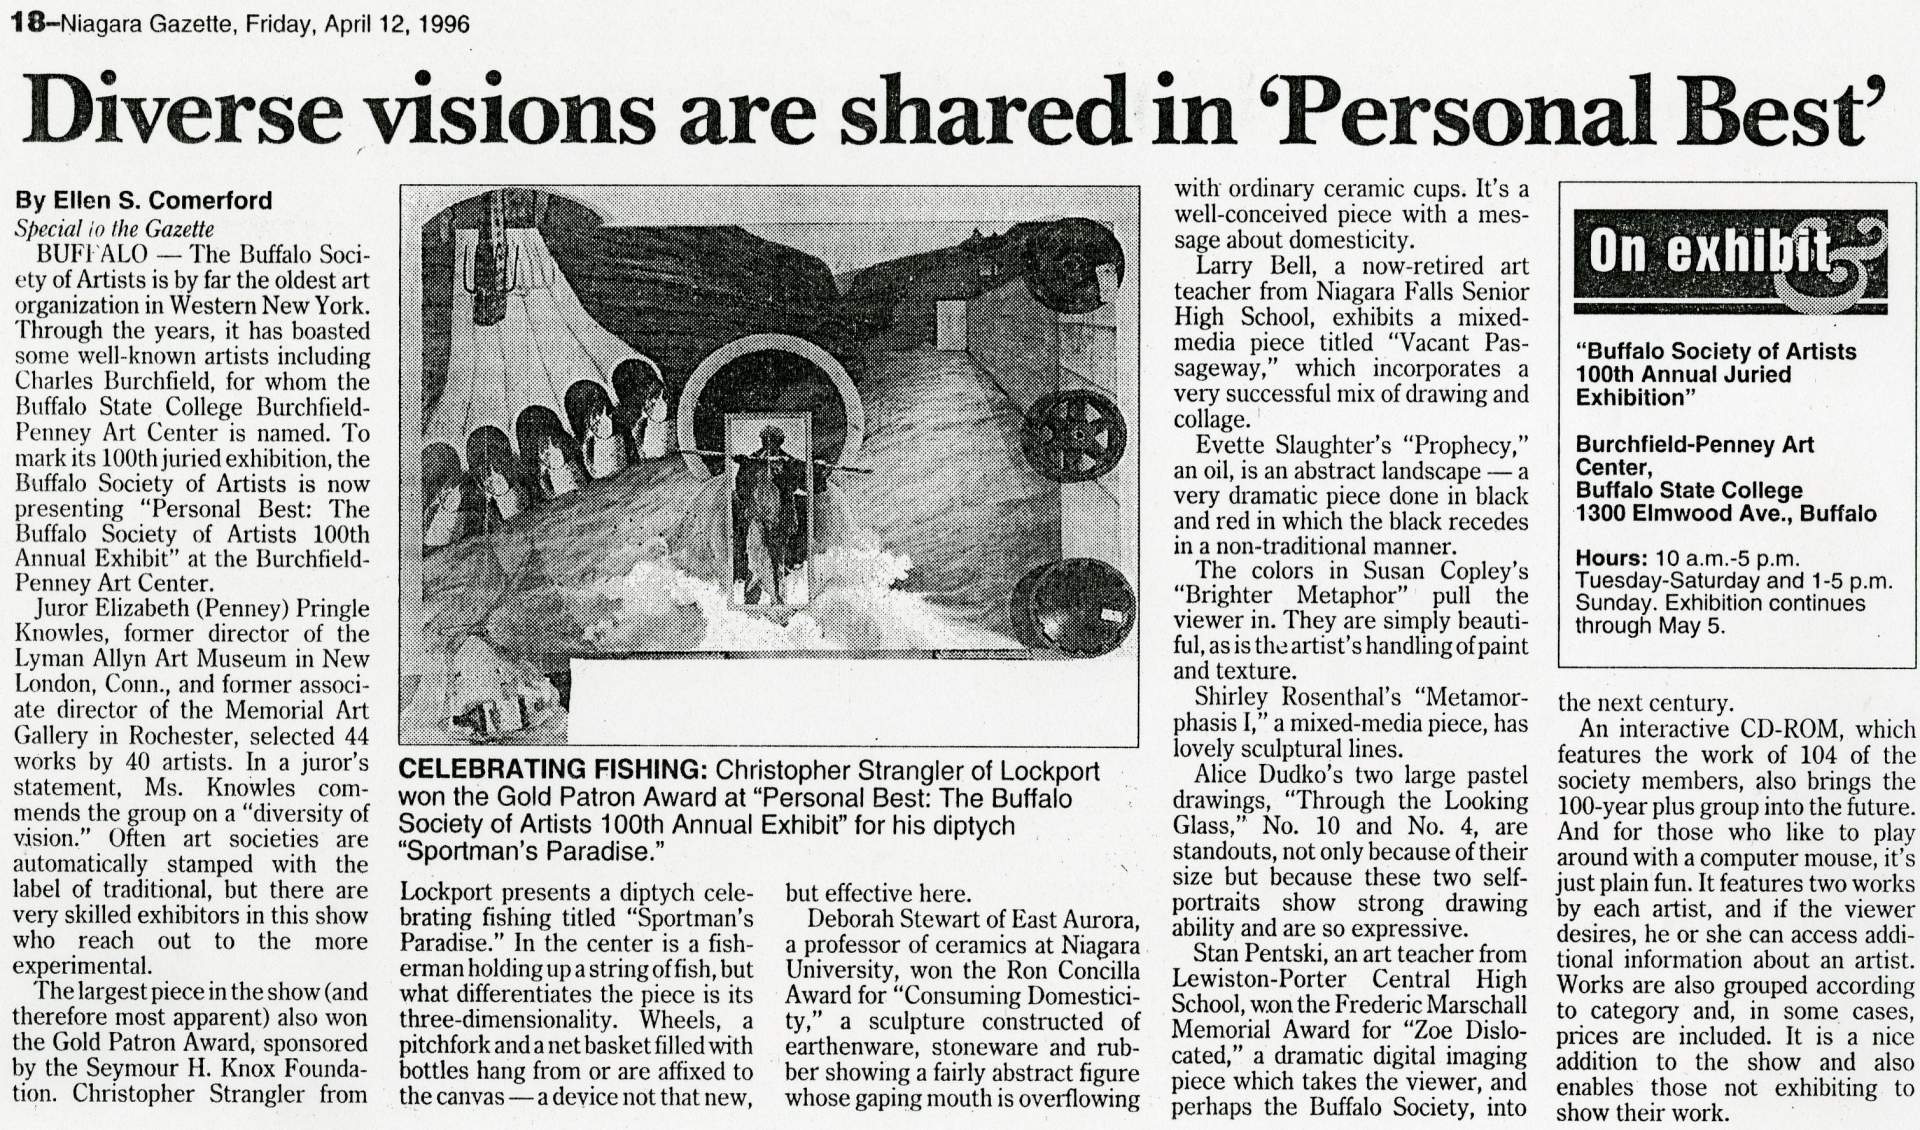 News Article: "Diverse Visions are Shared in "Personal Best"